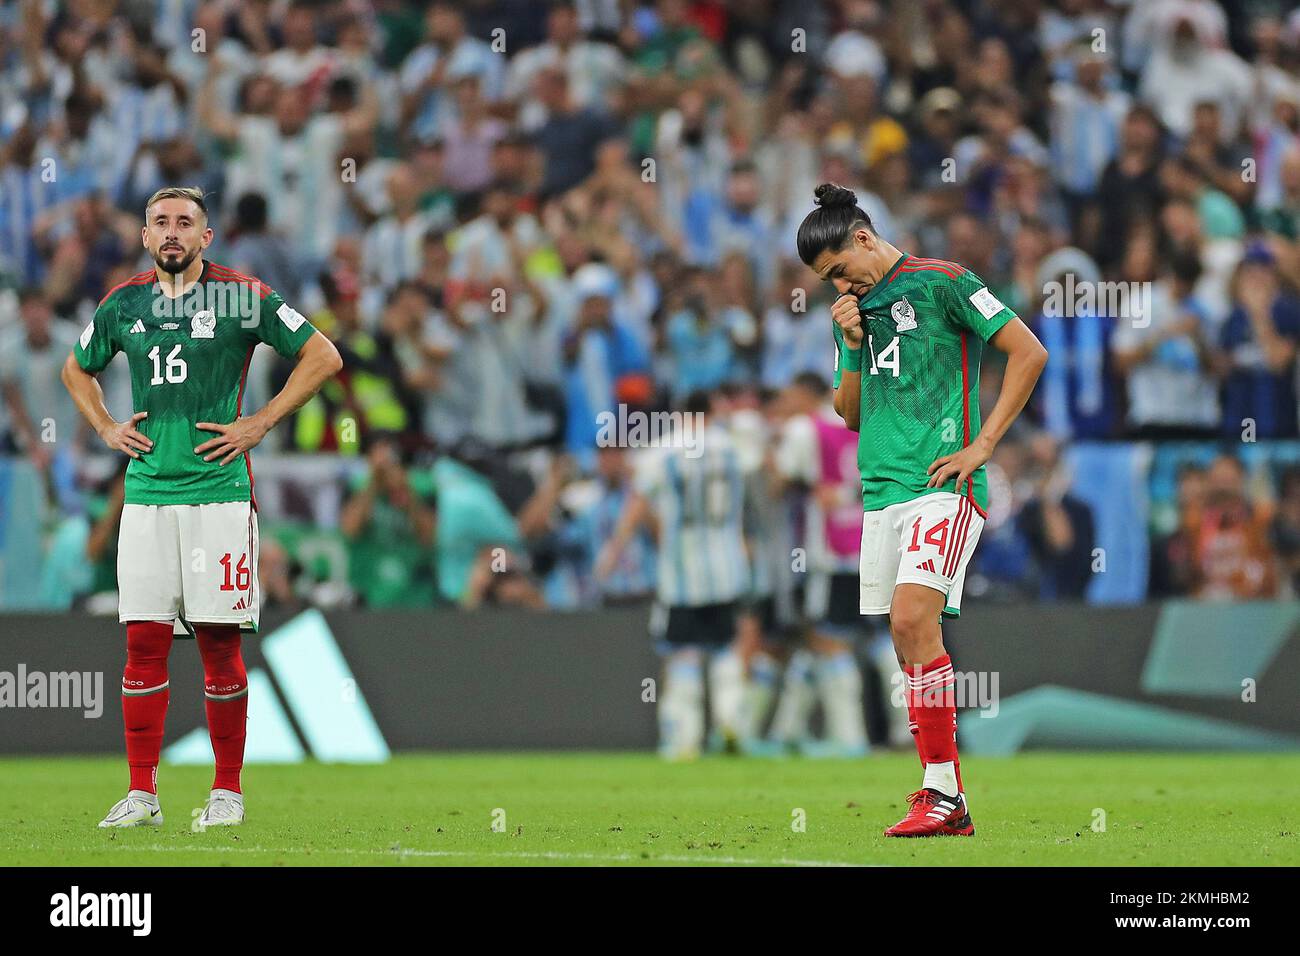 Doha, Qatar. 26th Nov, 2022. Hector Herrera and Erick Gutierrez of Mexico, regret the goal by Enzo Fernandez of Argentina during the match between Argentina and Mexico, for the 2nd round of Group C of the FIFA World Cup Qatar 2022, at Lusail Stadium, this Saturday 26. 30761 (Heuler Andrey/SPP) Credit: SPP Sport Press Photo. /Alamy Live News Stock Photo